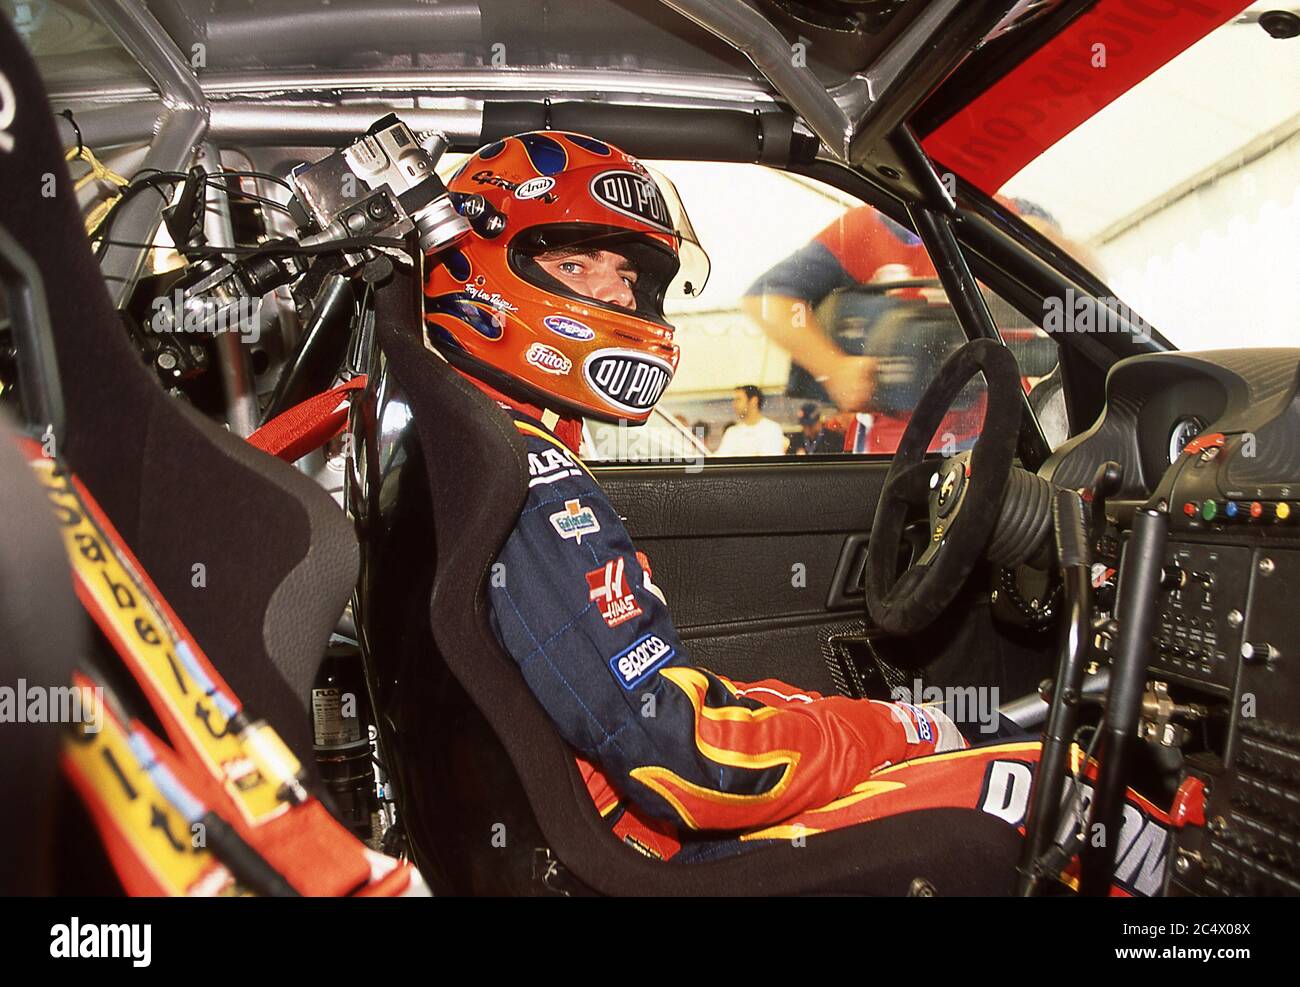 Jeff Gordon of the USA team at the ROC Race of Champions Gran Caneria Spain 2002 Stock Photo